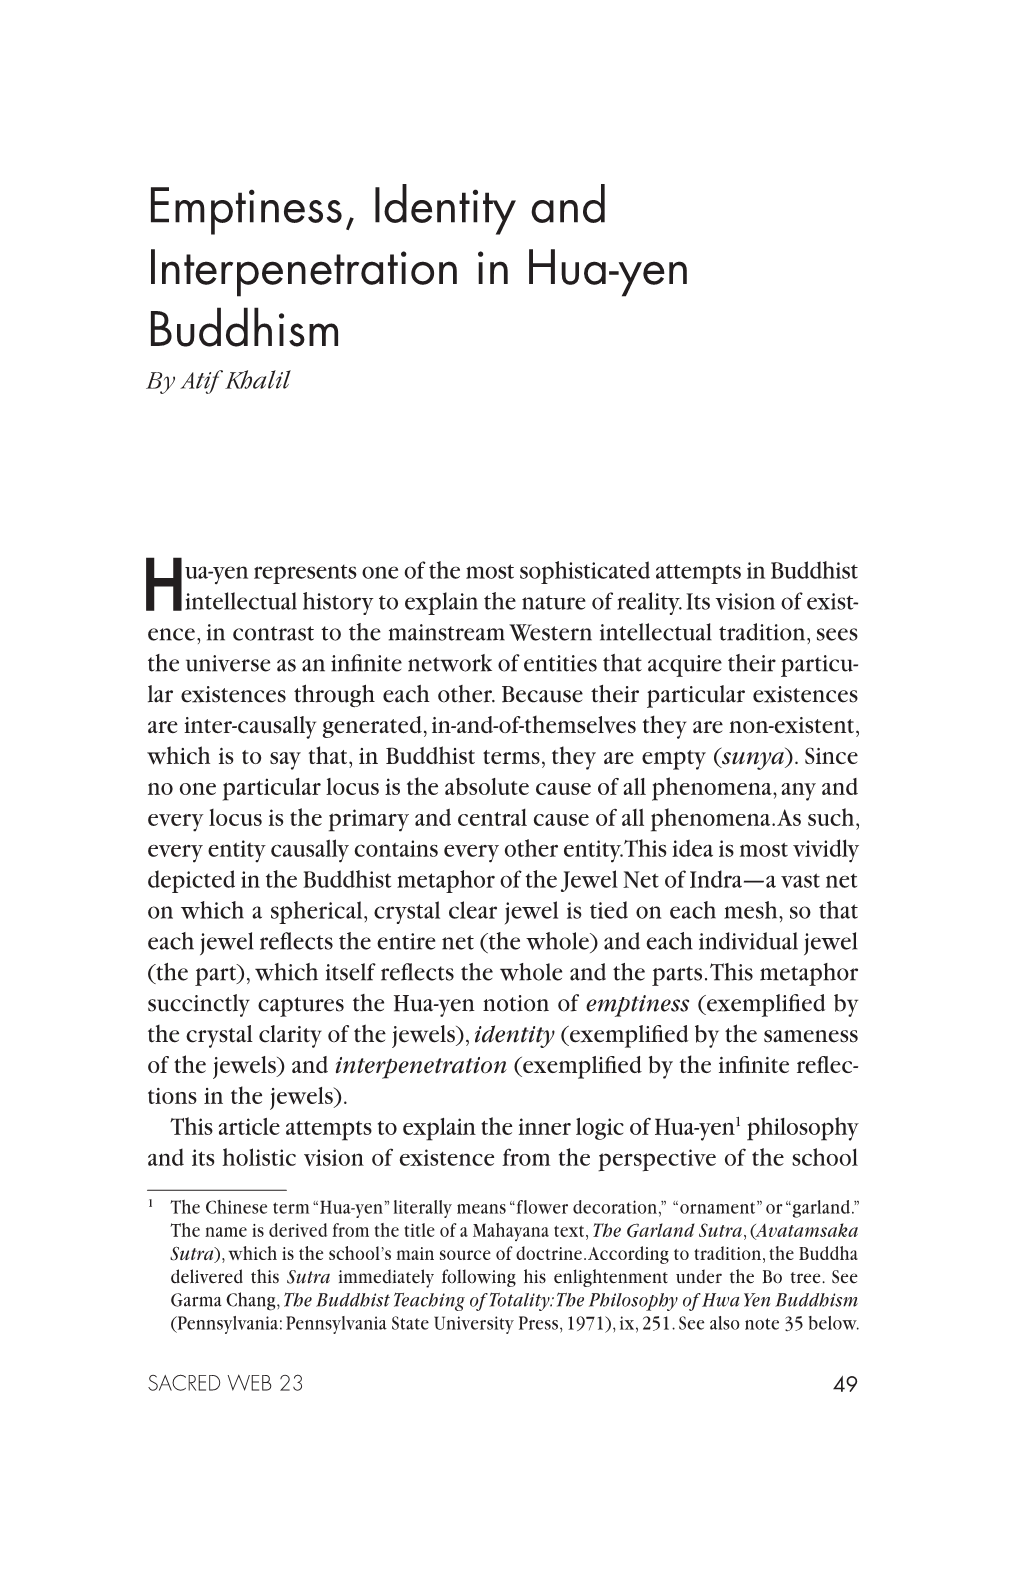 Emptiness, Identity and Interpenetration in Hua-Yen Buddhism by Atif Khalil